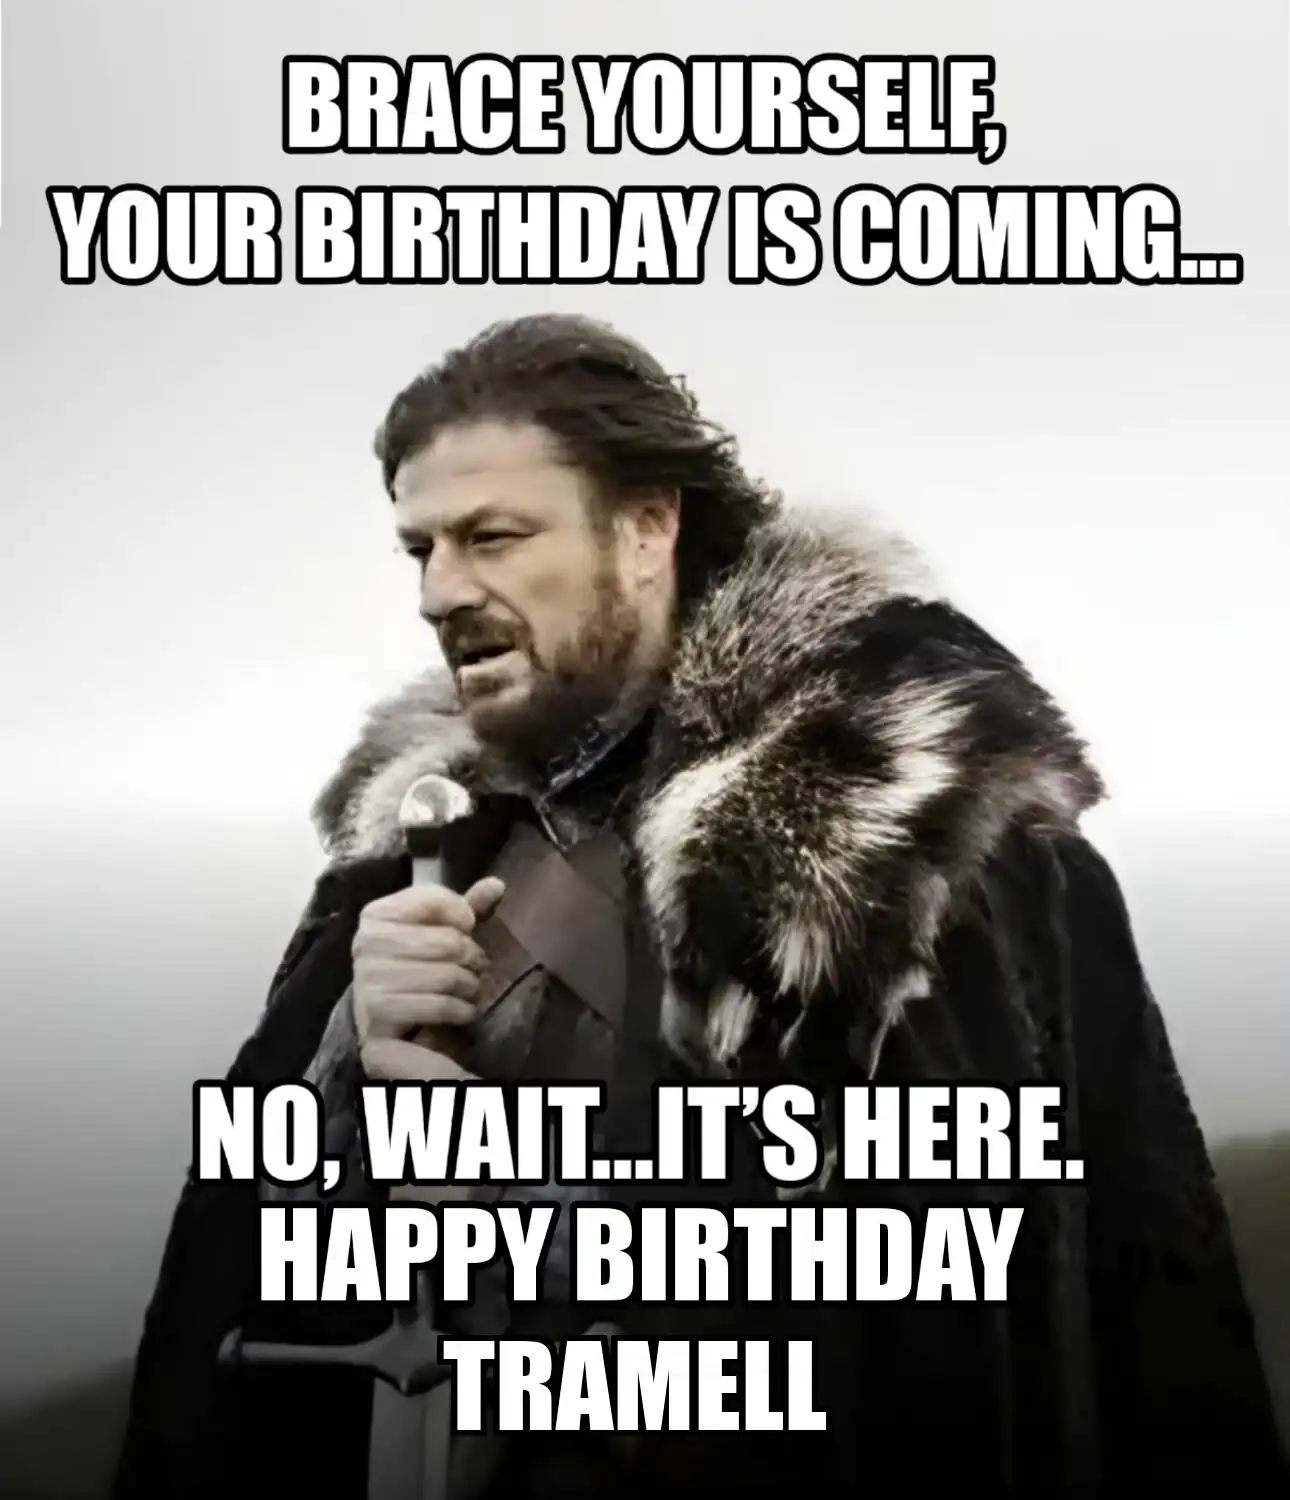 Happy Birthday Tramell Brace Yourself Your Birthday Is Coming Meme